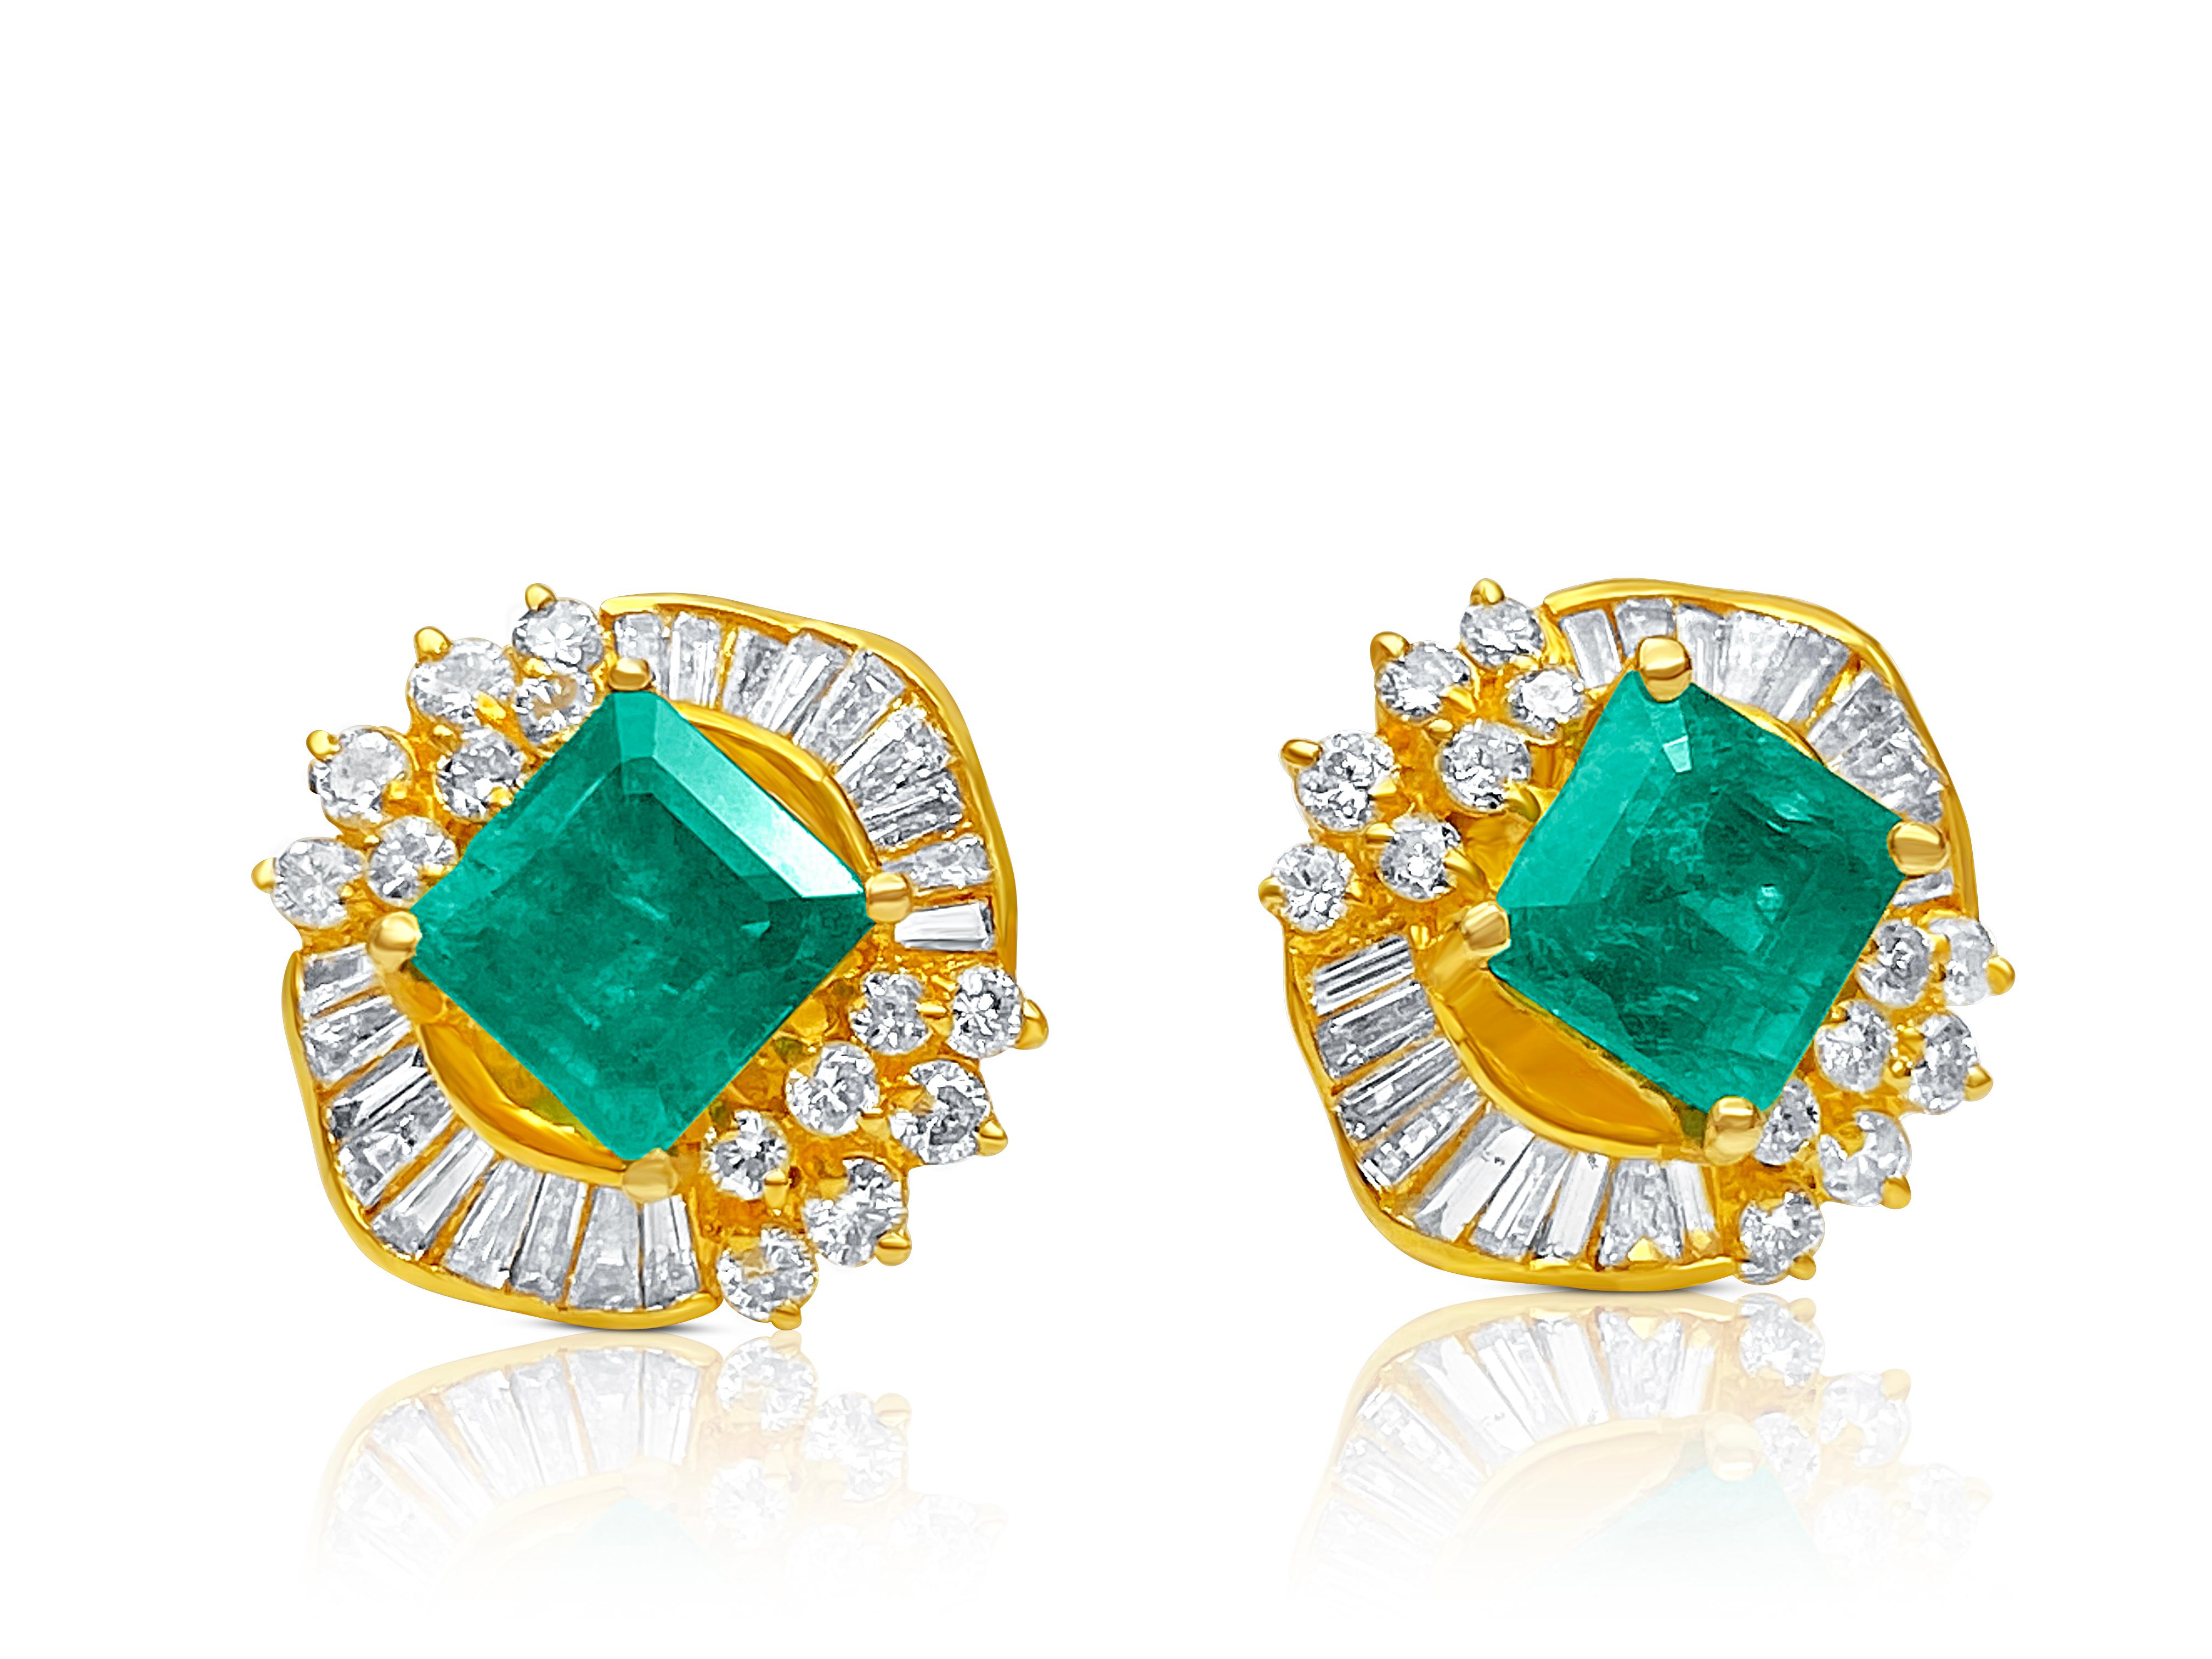 Centering a lovely pair of Emerald-Cut Colombian Emeralds totaling 1.70 Carats, framed by an additional 1.35 Carats of Baguette-Cut and Round-Brilliant Cut Diamonds, and set in 18K Yellow Gold– also a part of a lovely Emerald Set!

Details:
✔ Stone: